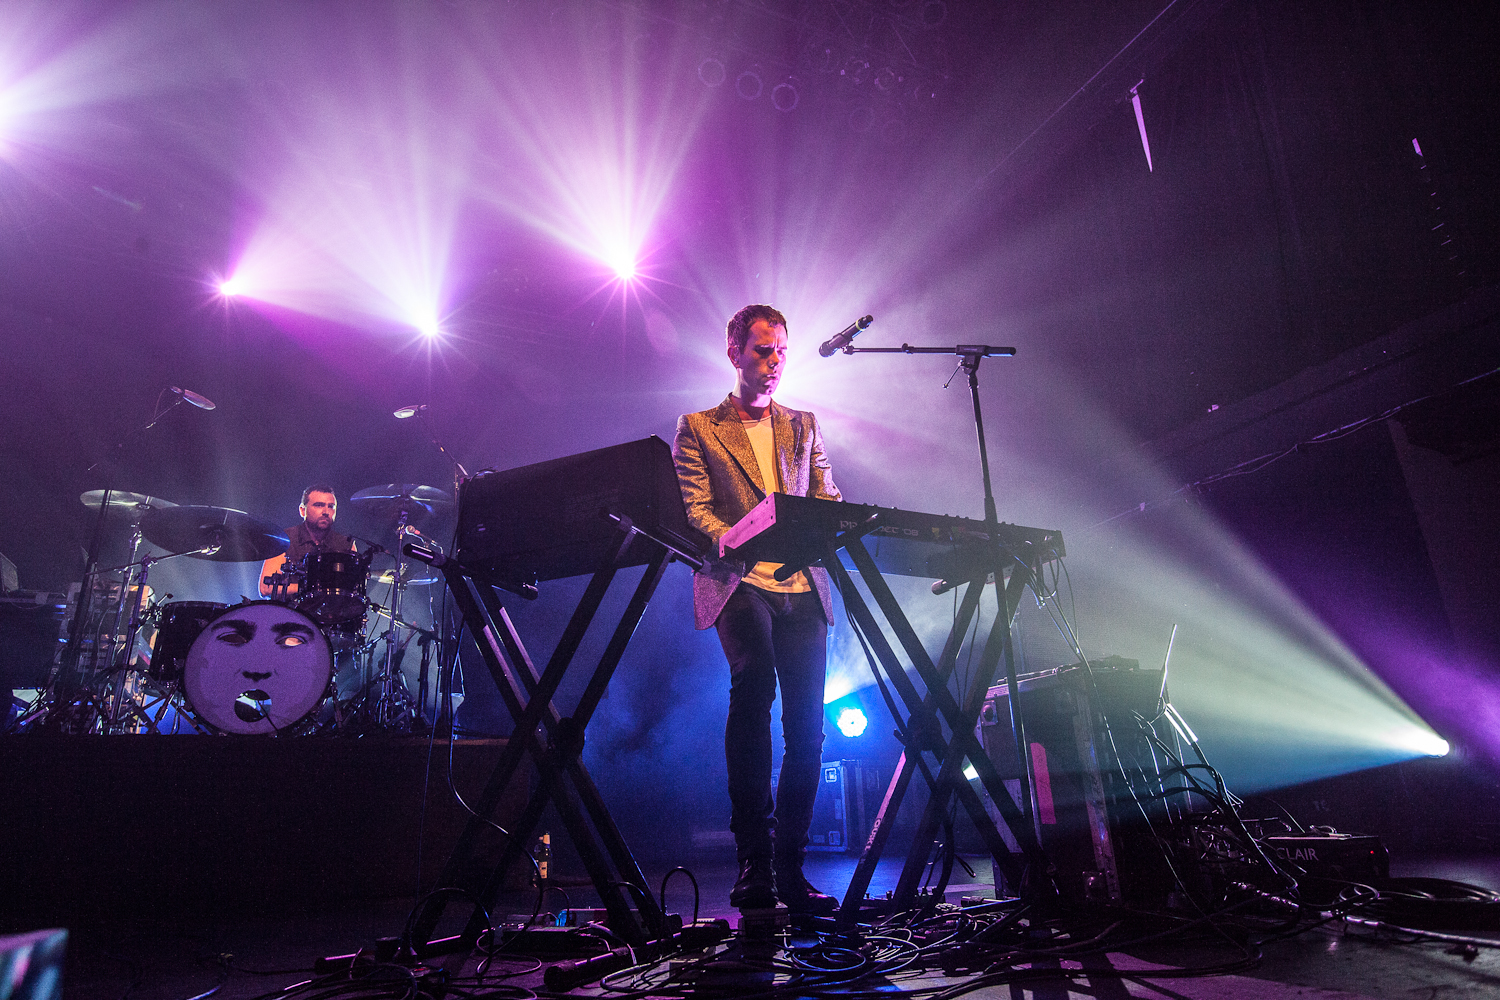 The Presets LIVE at Terminal 5 on October 19, 2012